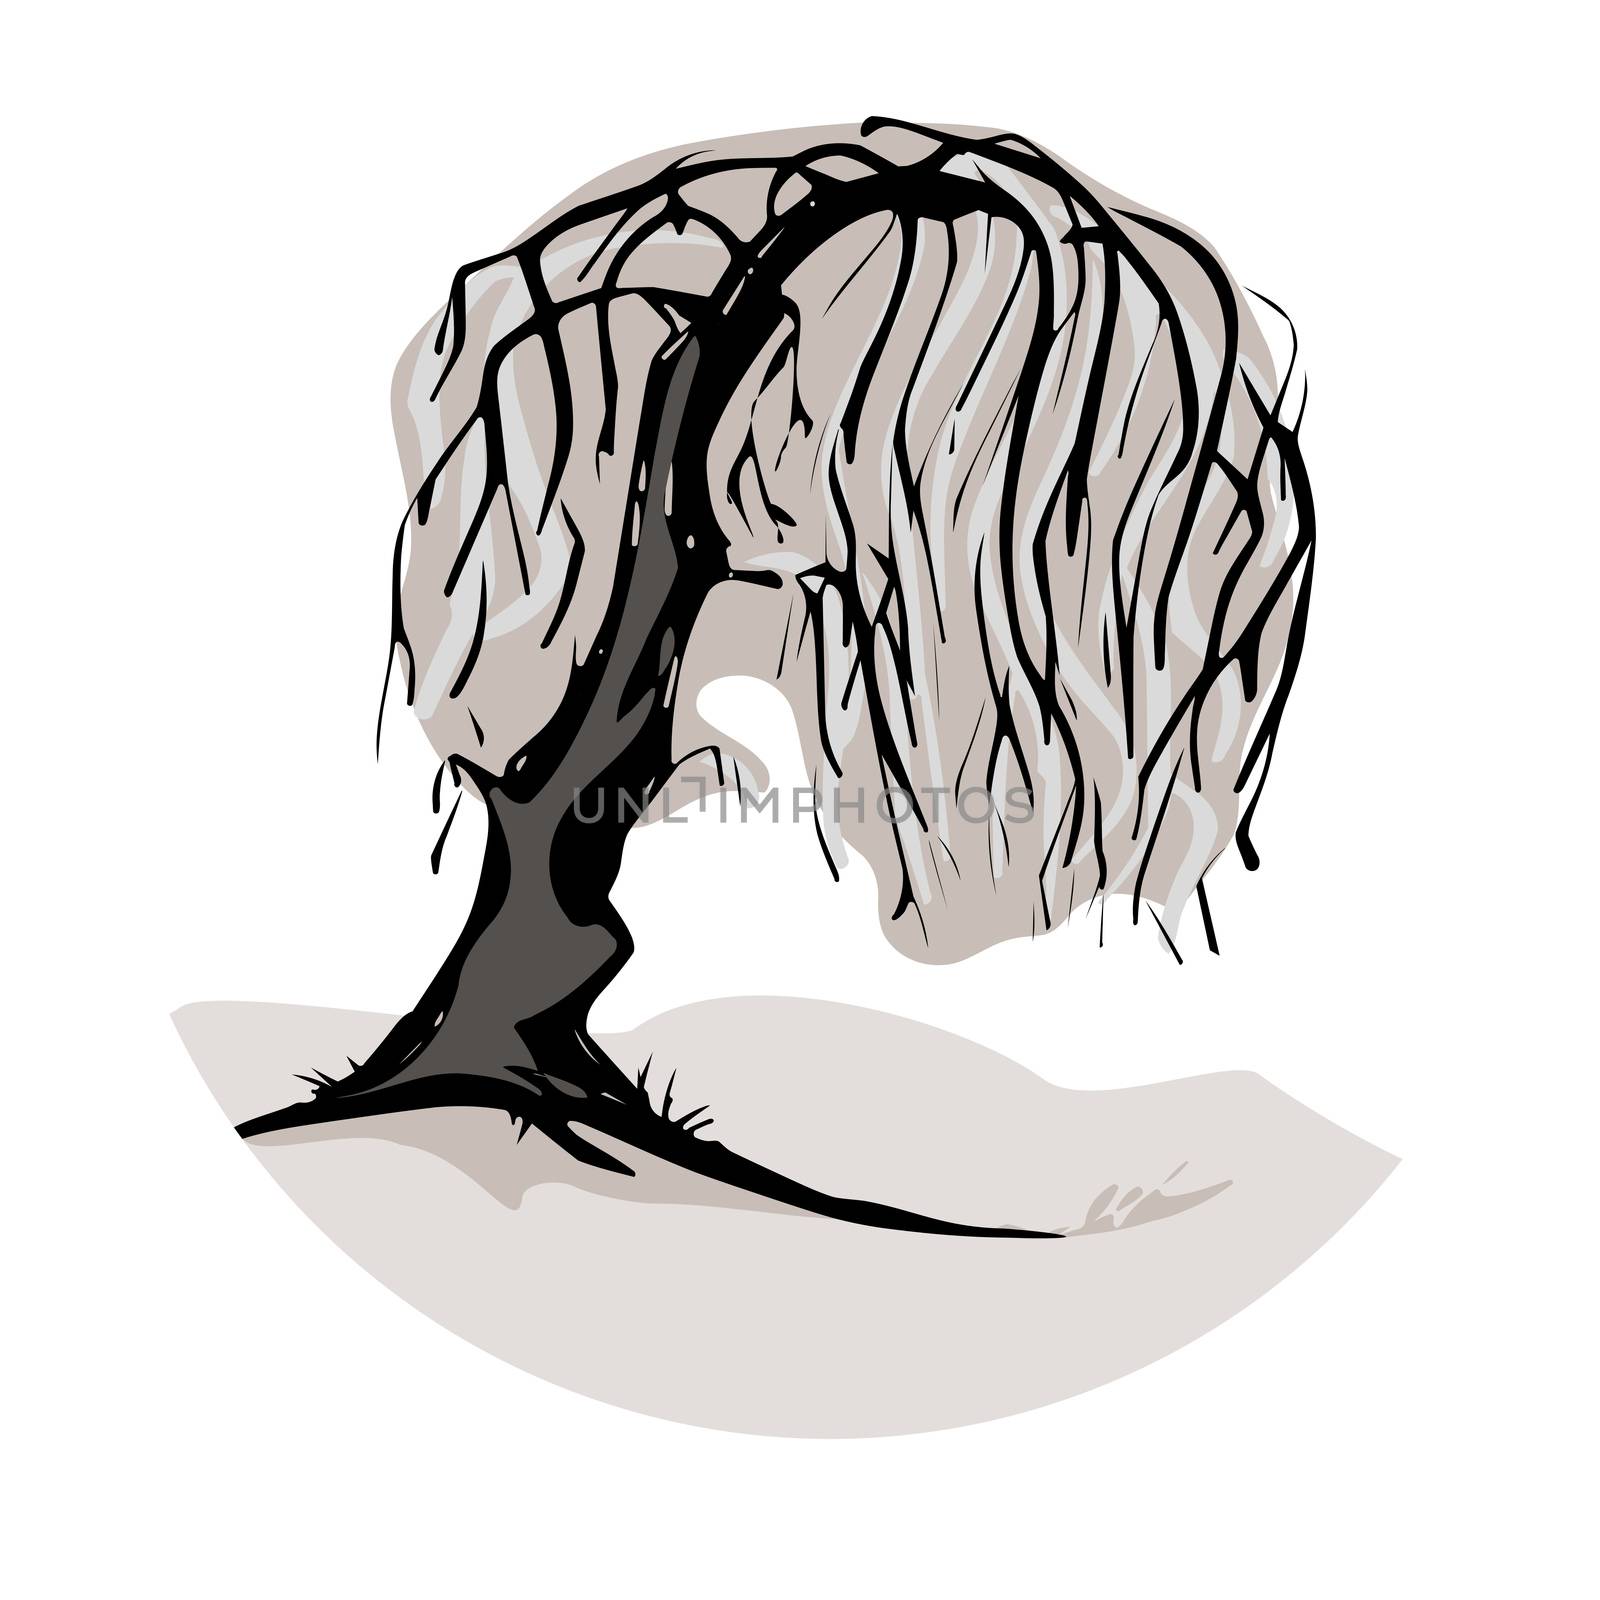 An illustration of a weeping willow tree symbol